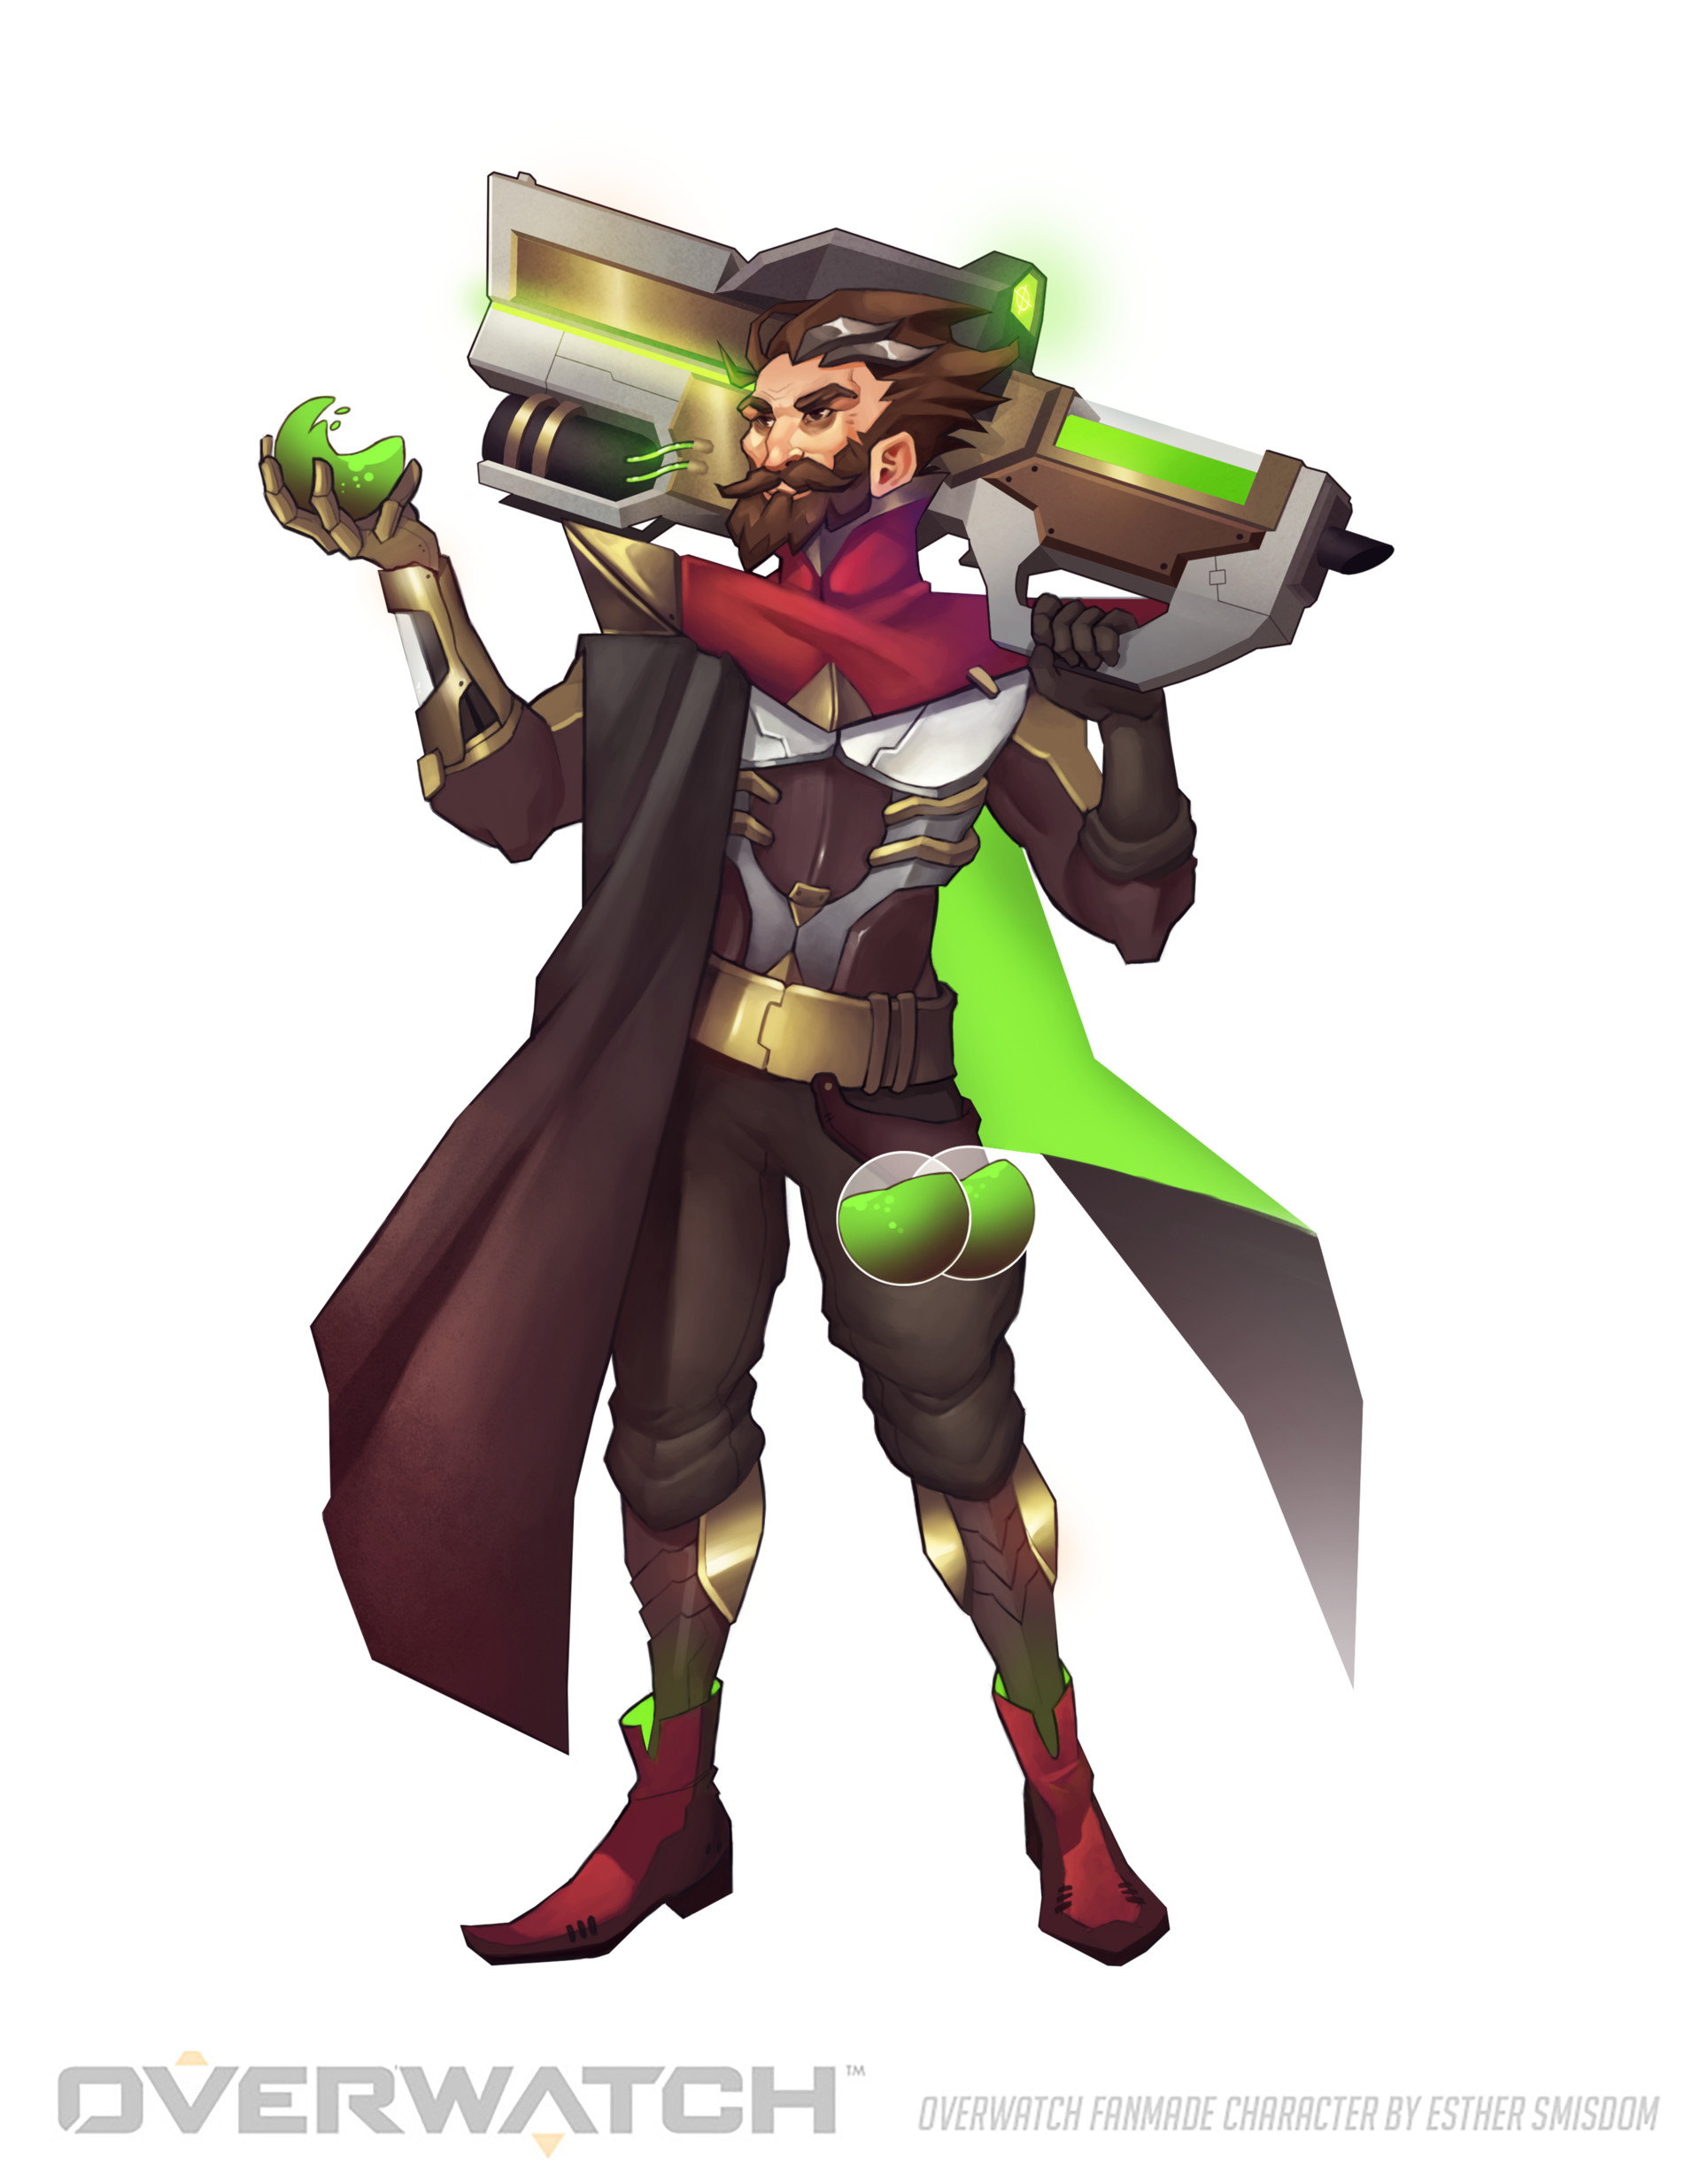 Cyrille Fan-made Overwatch Character.